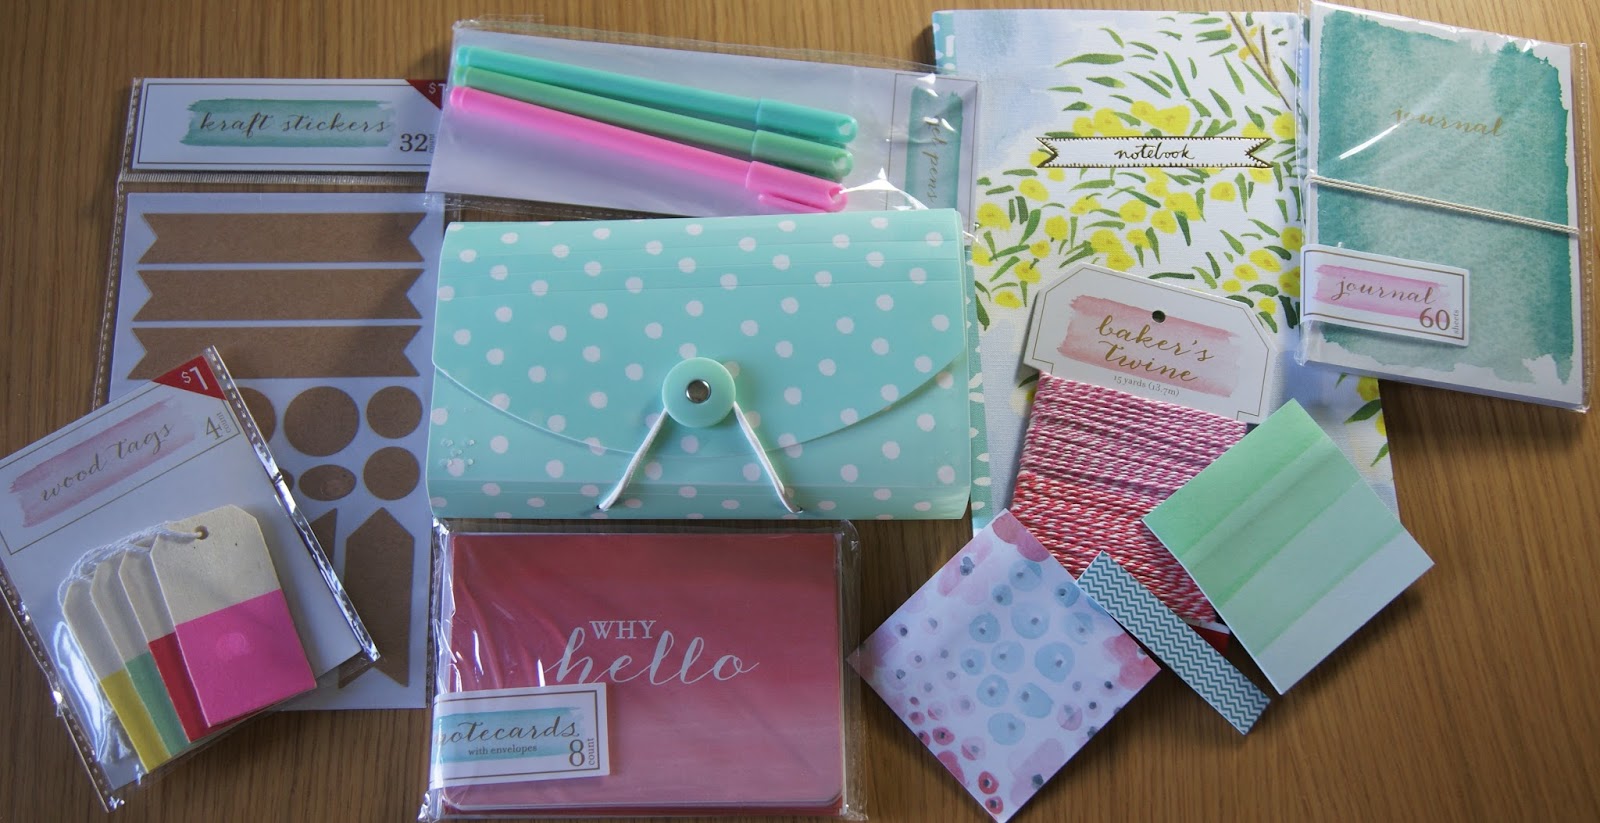 ... up the stationery in the target dollar spot section in us target